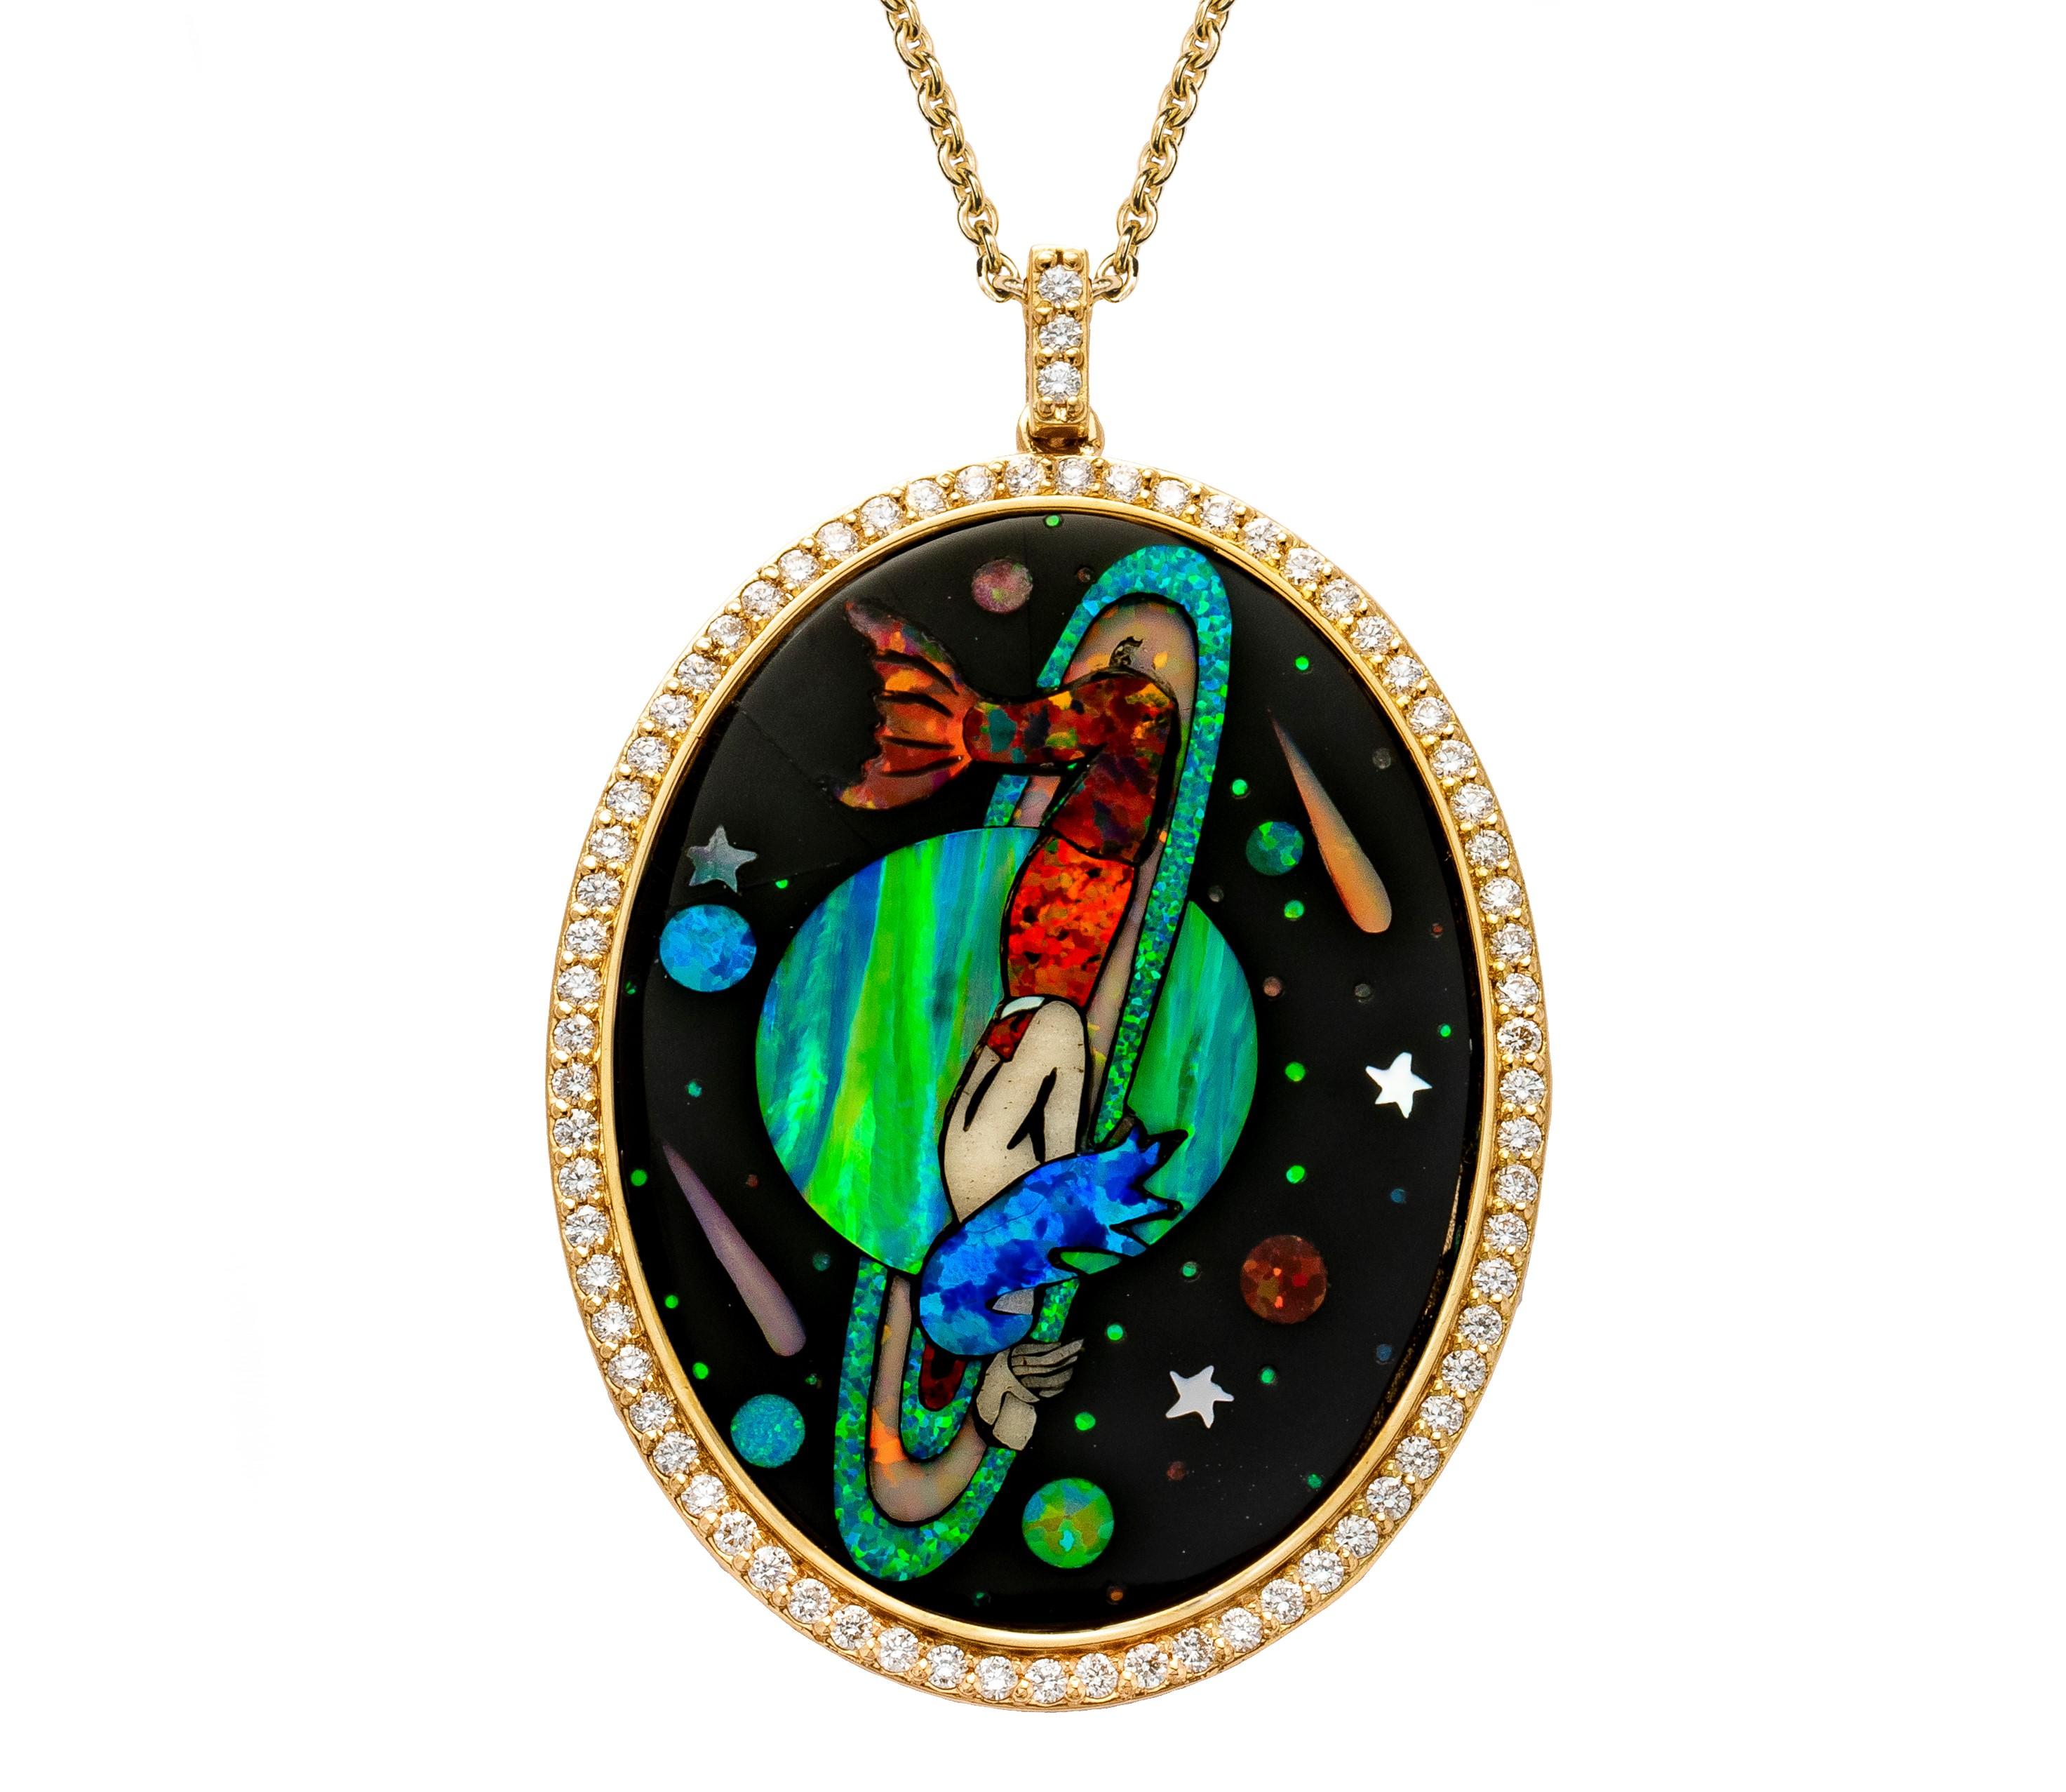 The Jenny Dee Mermaid Necklace

18kt yellow gold, Inlay with opals, onyx, mother of pearl – 0.48ct White Diamonds, 11,61 gr total gold. 
Chain length : 60 cm
Handmade in Italy.
*Due to Covid-19 situation, we may have delivery delays.

The Cosmic